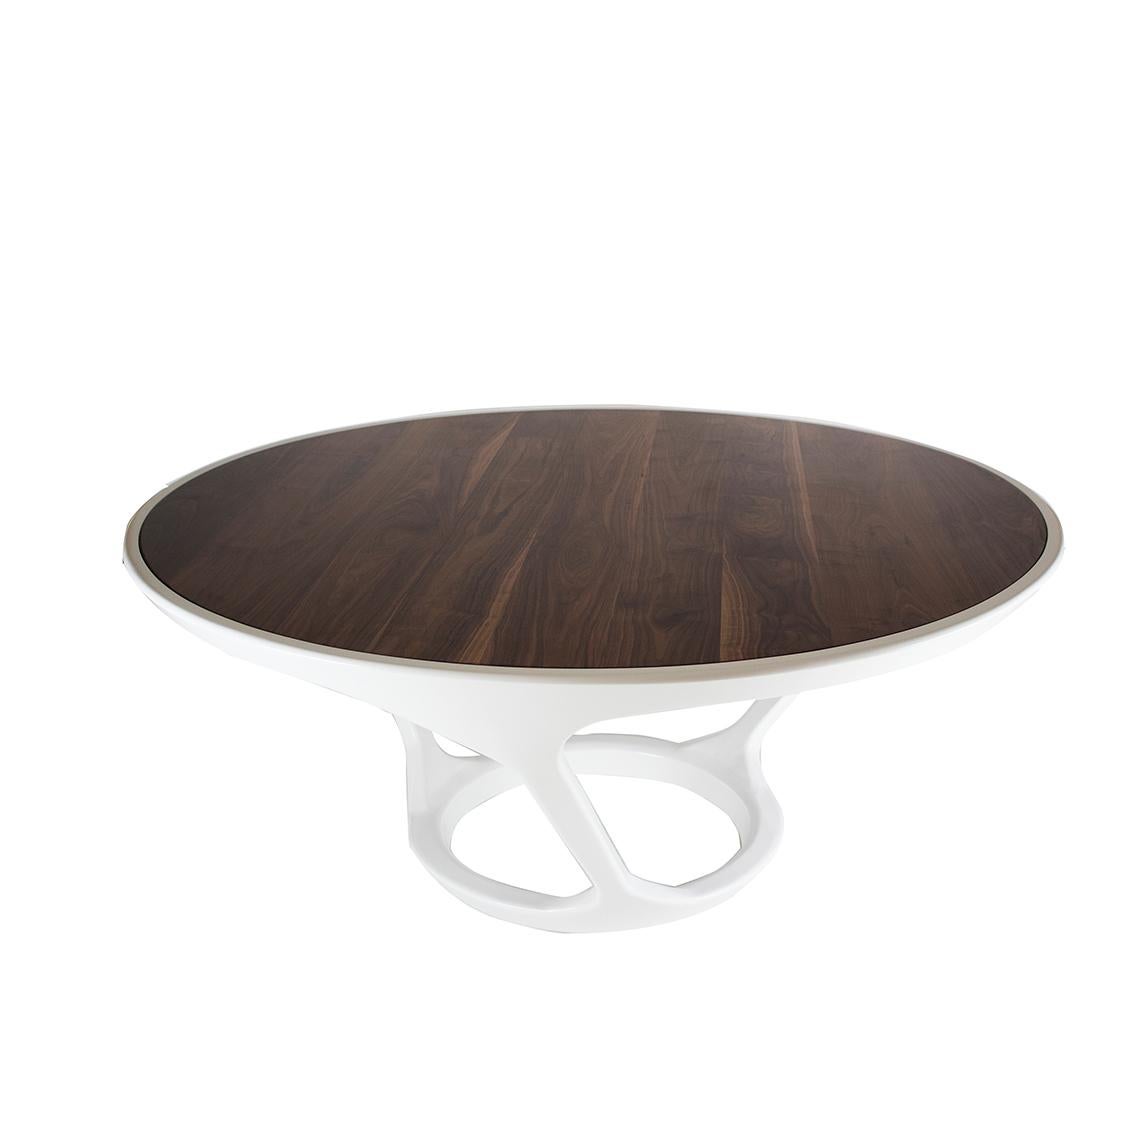 This modern round dining table has a 6 foot round maple base lacquered white and walnut top. Sits many people for easy conversations with a modern and innovative design. Customization of size and finish is available upon request.

Measurements: 30